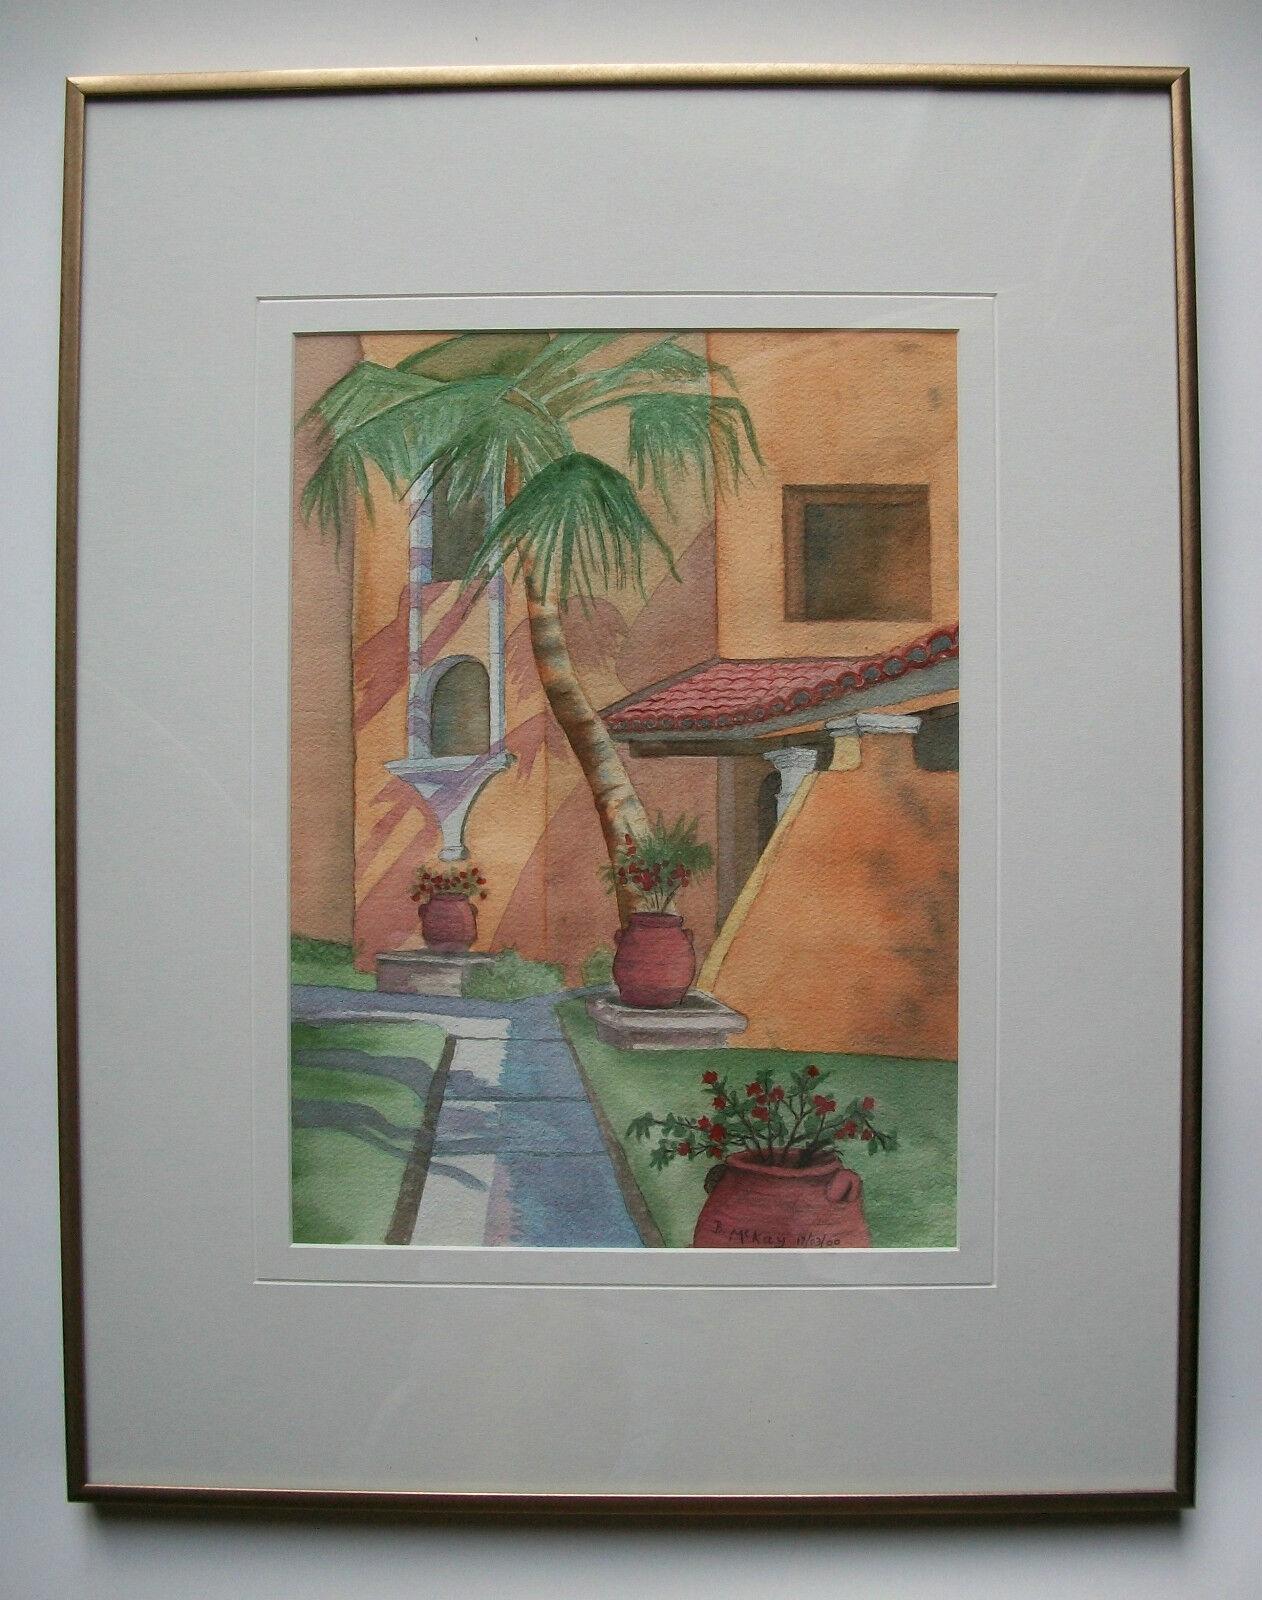 Modern B. McKay, 'La Jolla', Framed Watercolor Painting, Signed & Dated, circa 2000 For Sale